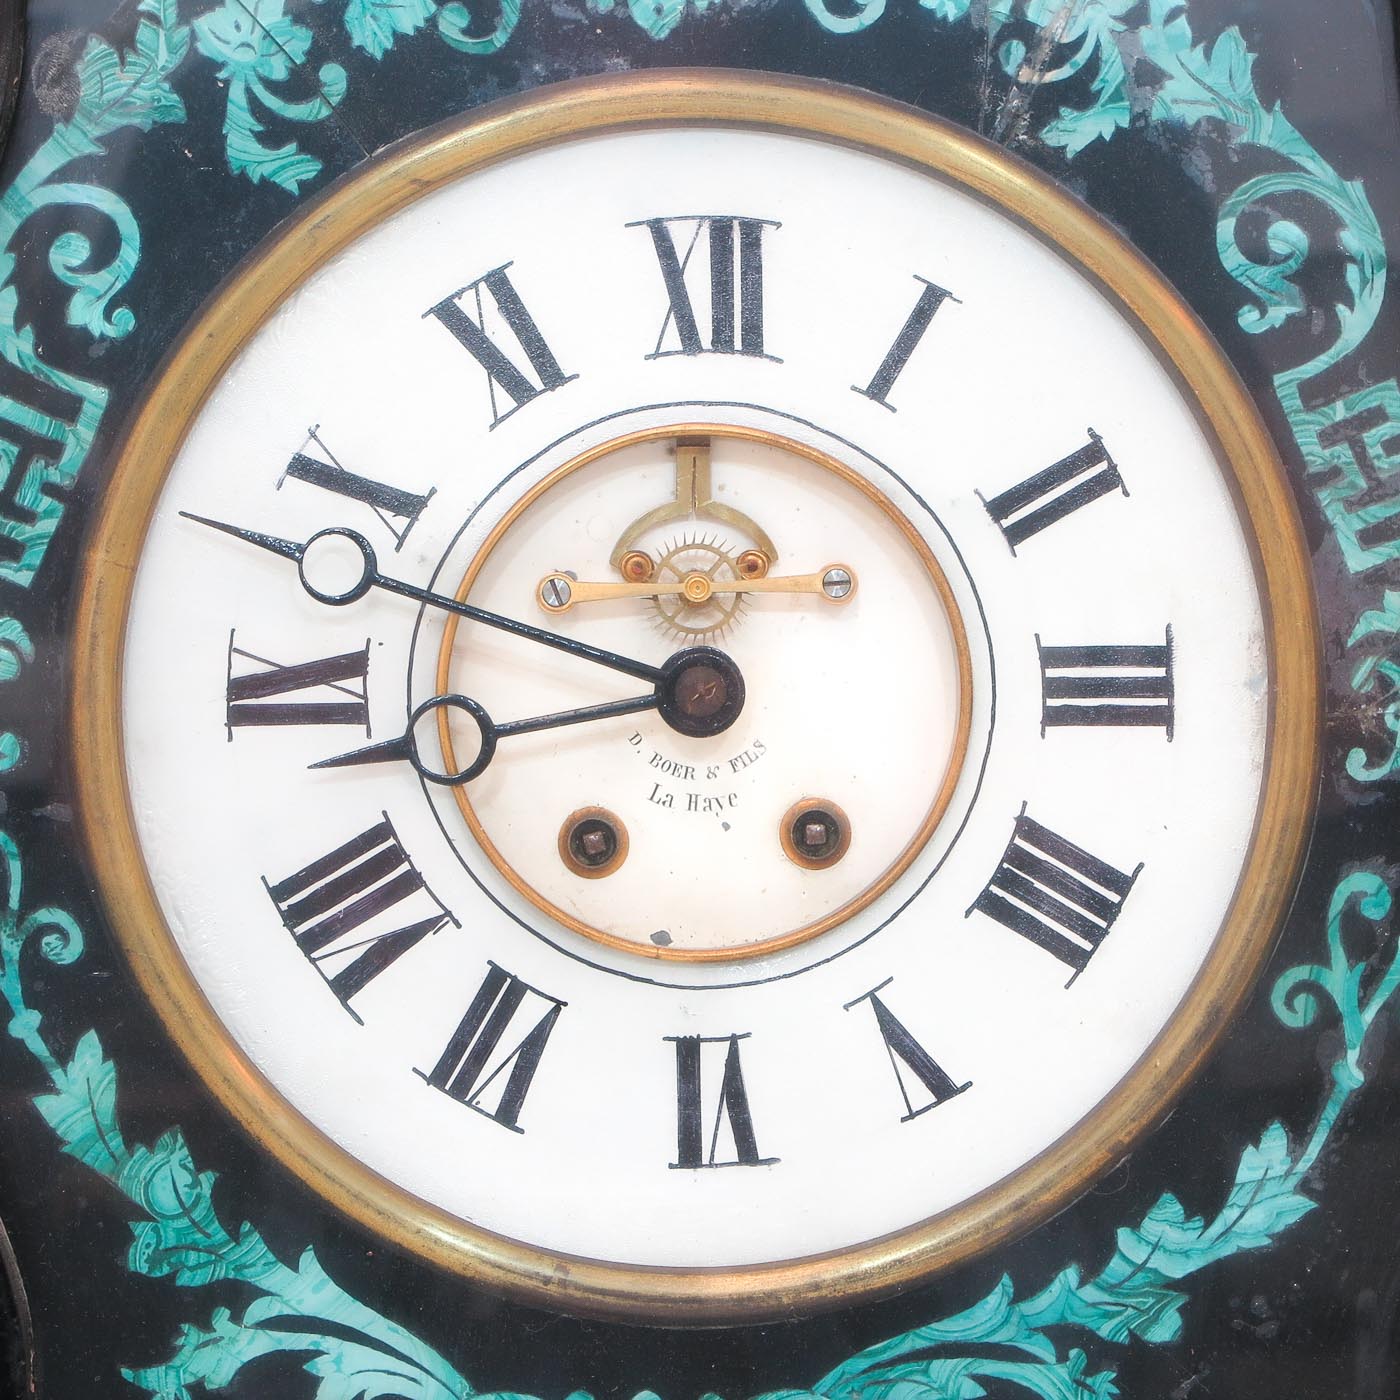 A 19th Century French Wall clock - Image 2 of 2